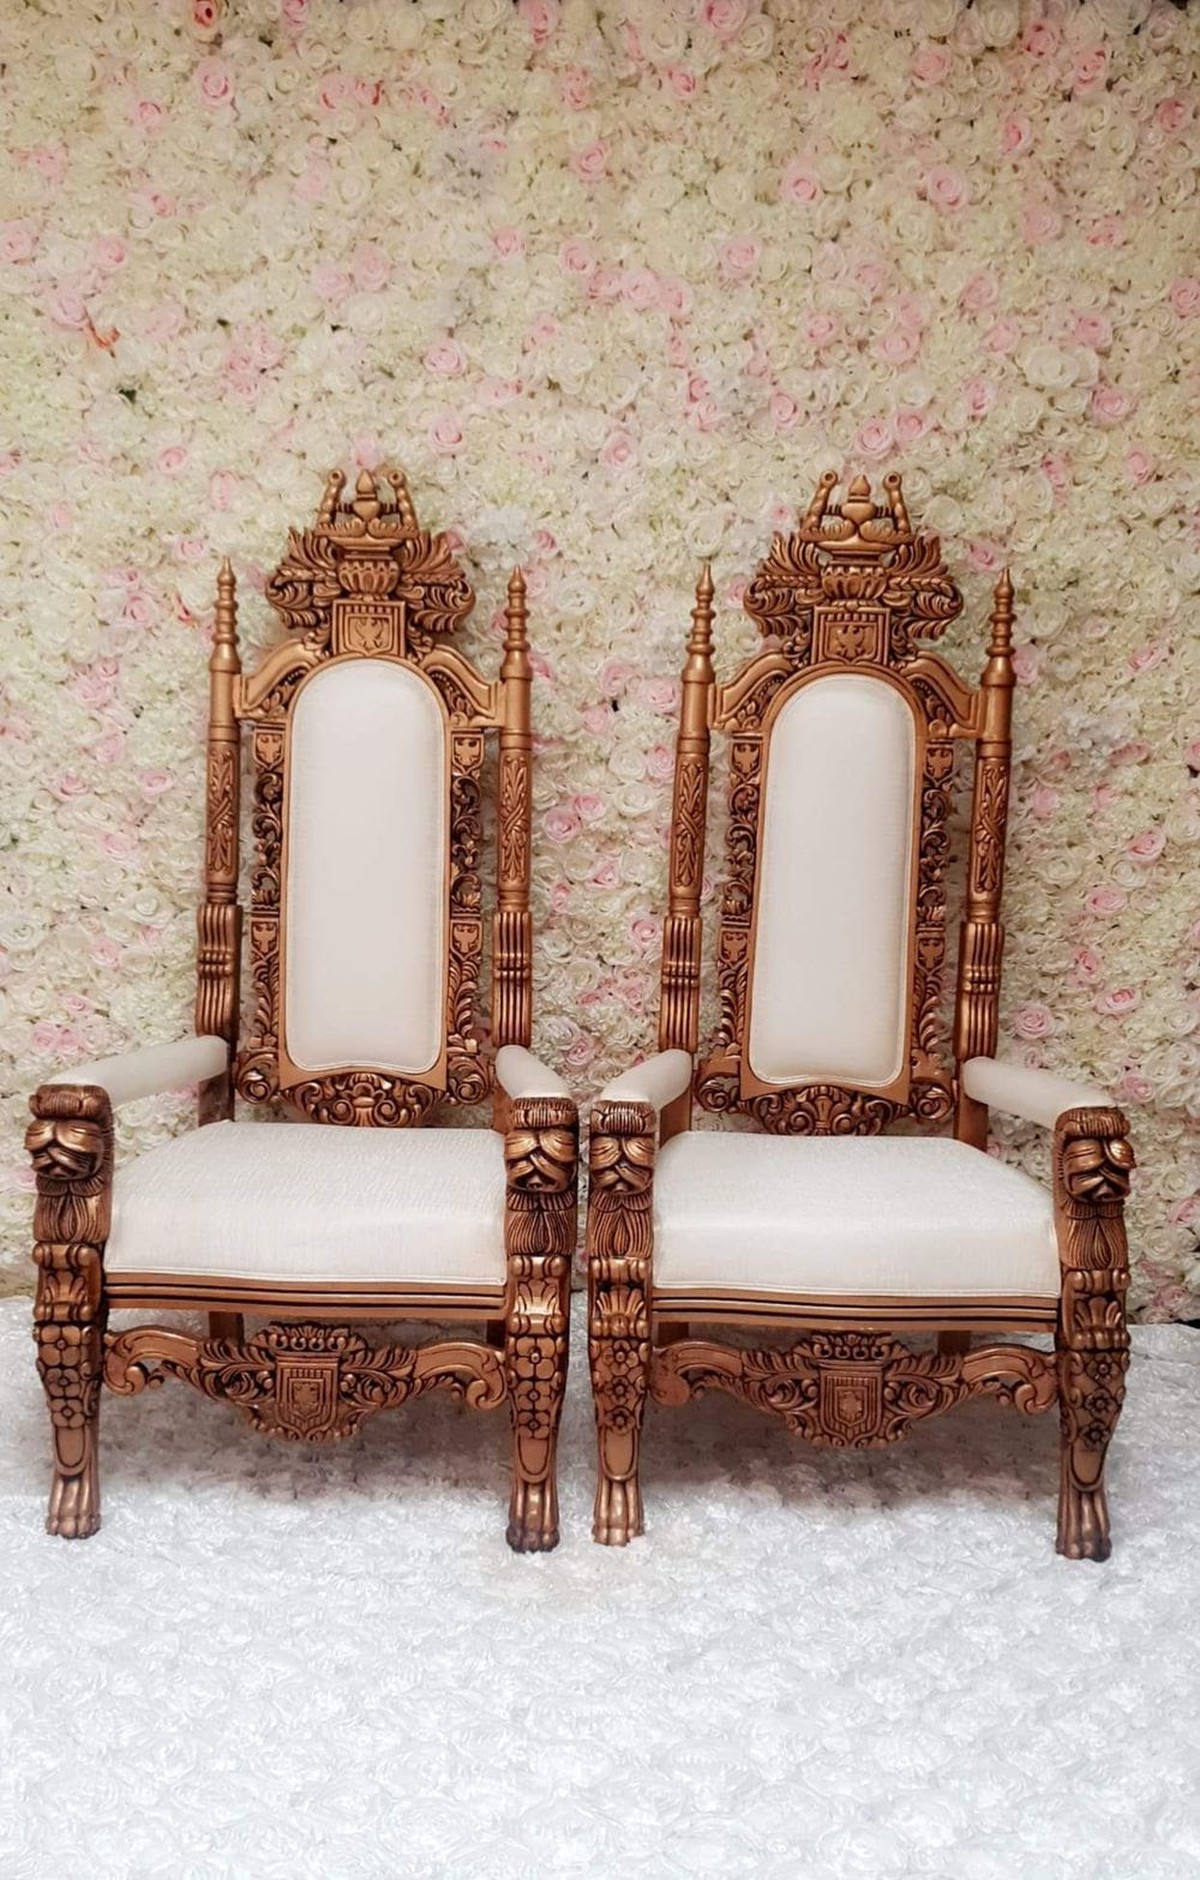 secondhand prop shop  thrones and wedding chairs  2x